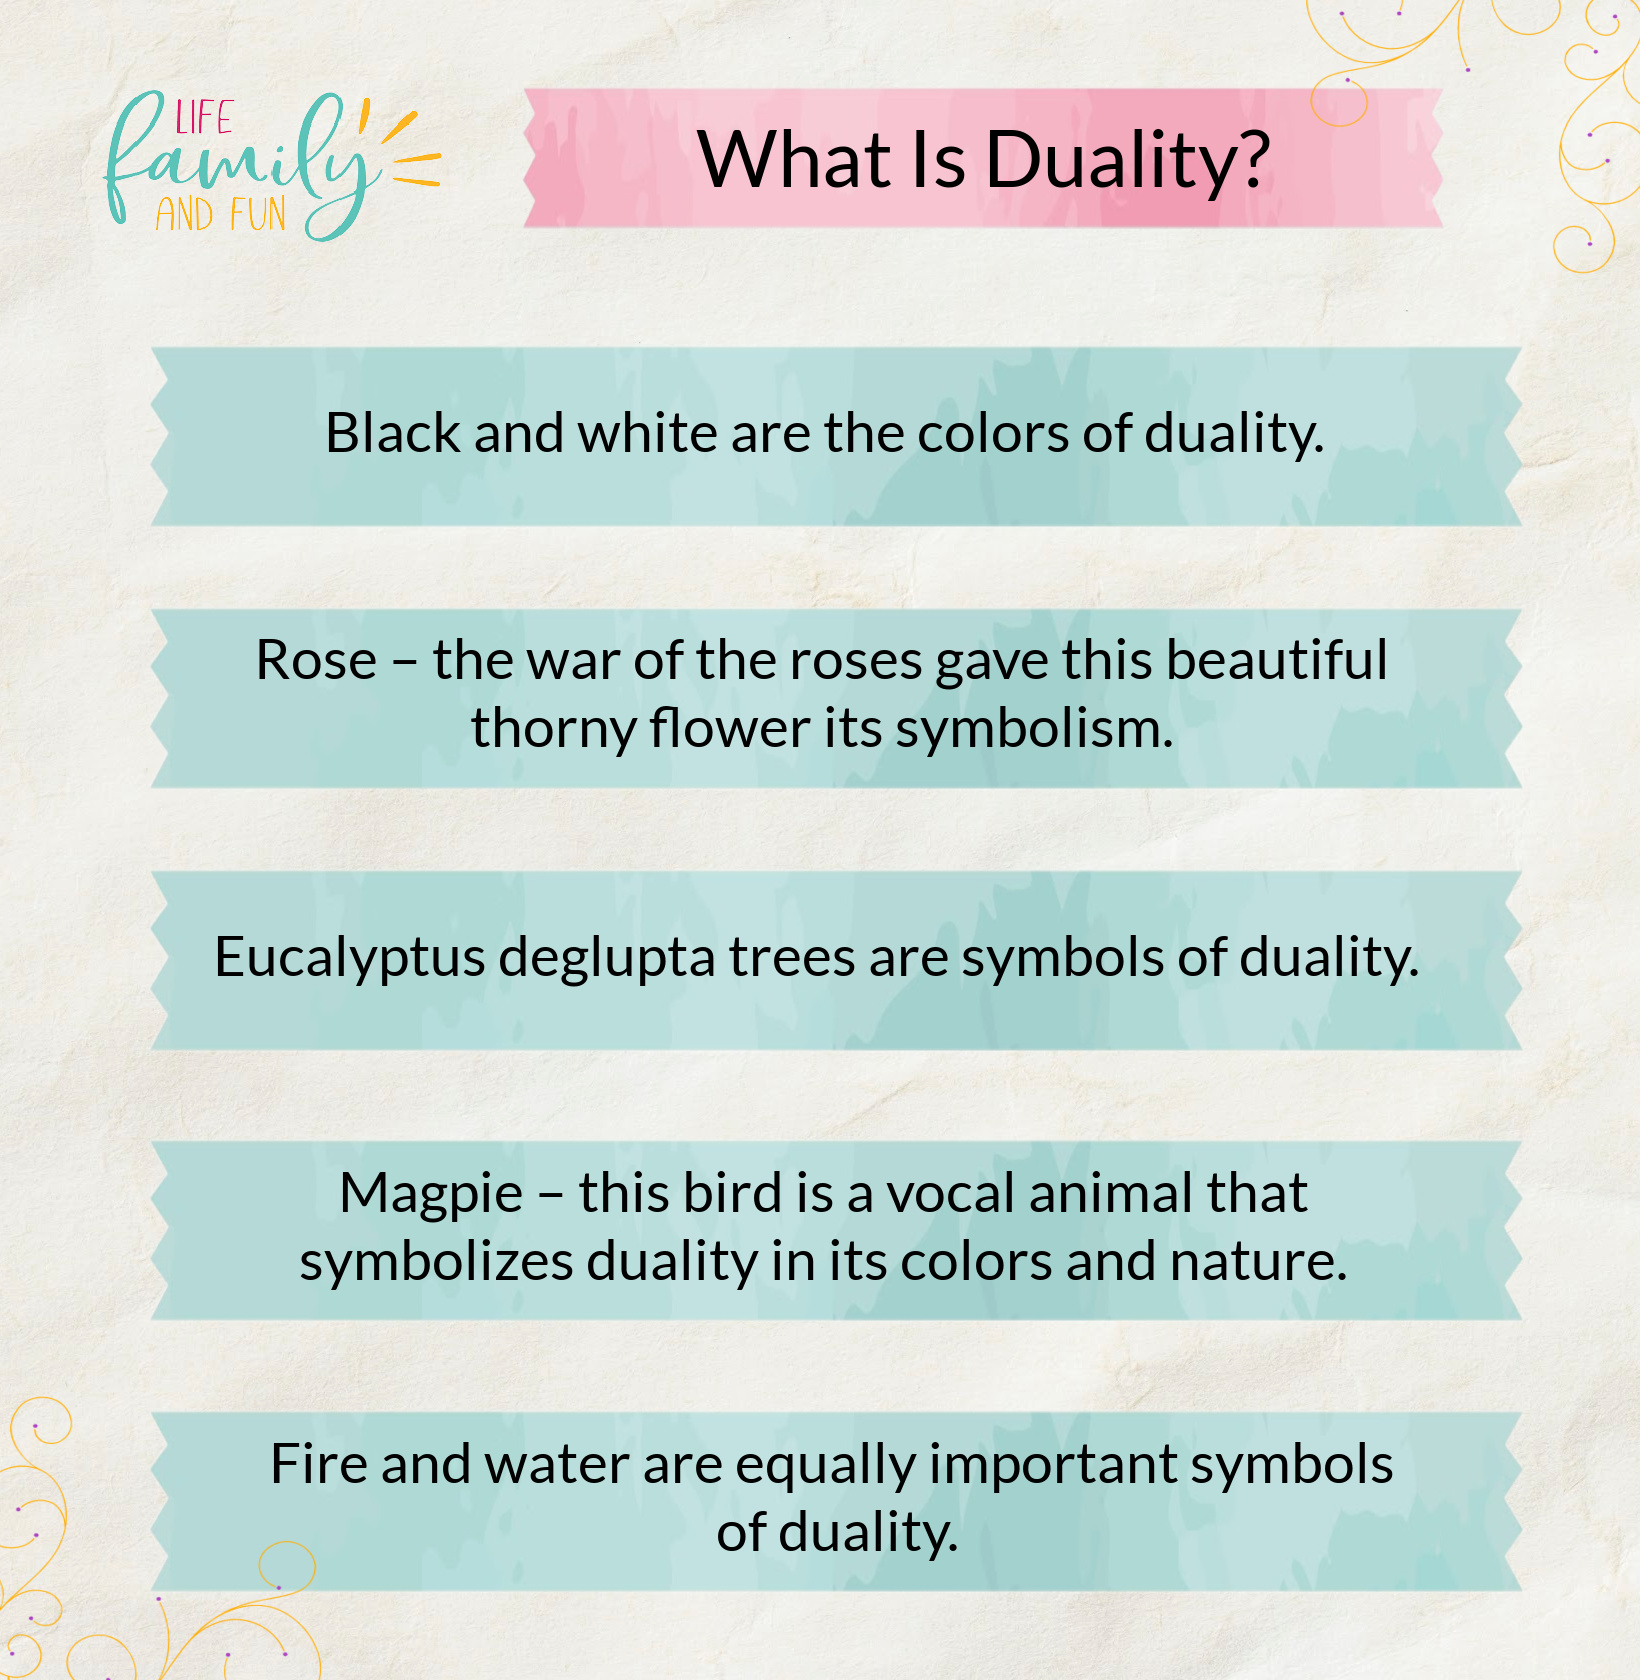 What Is Duality?